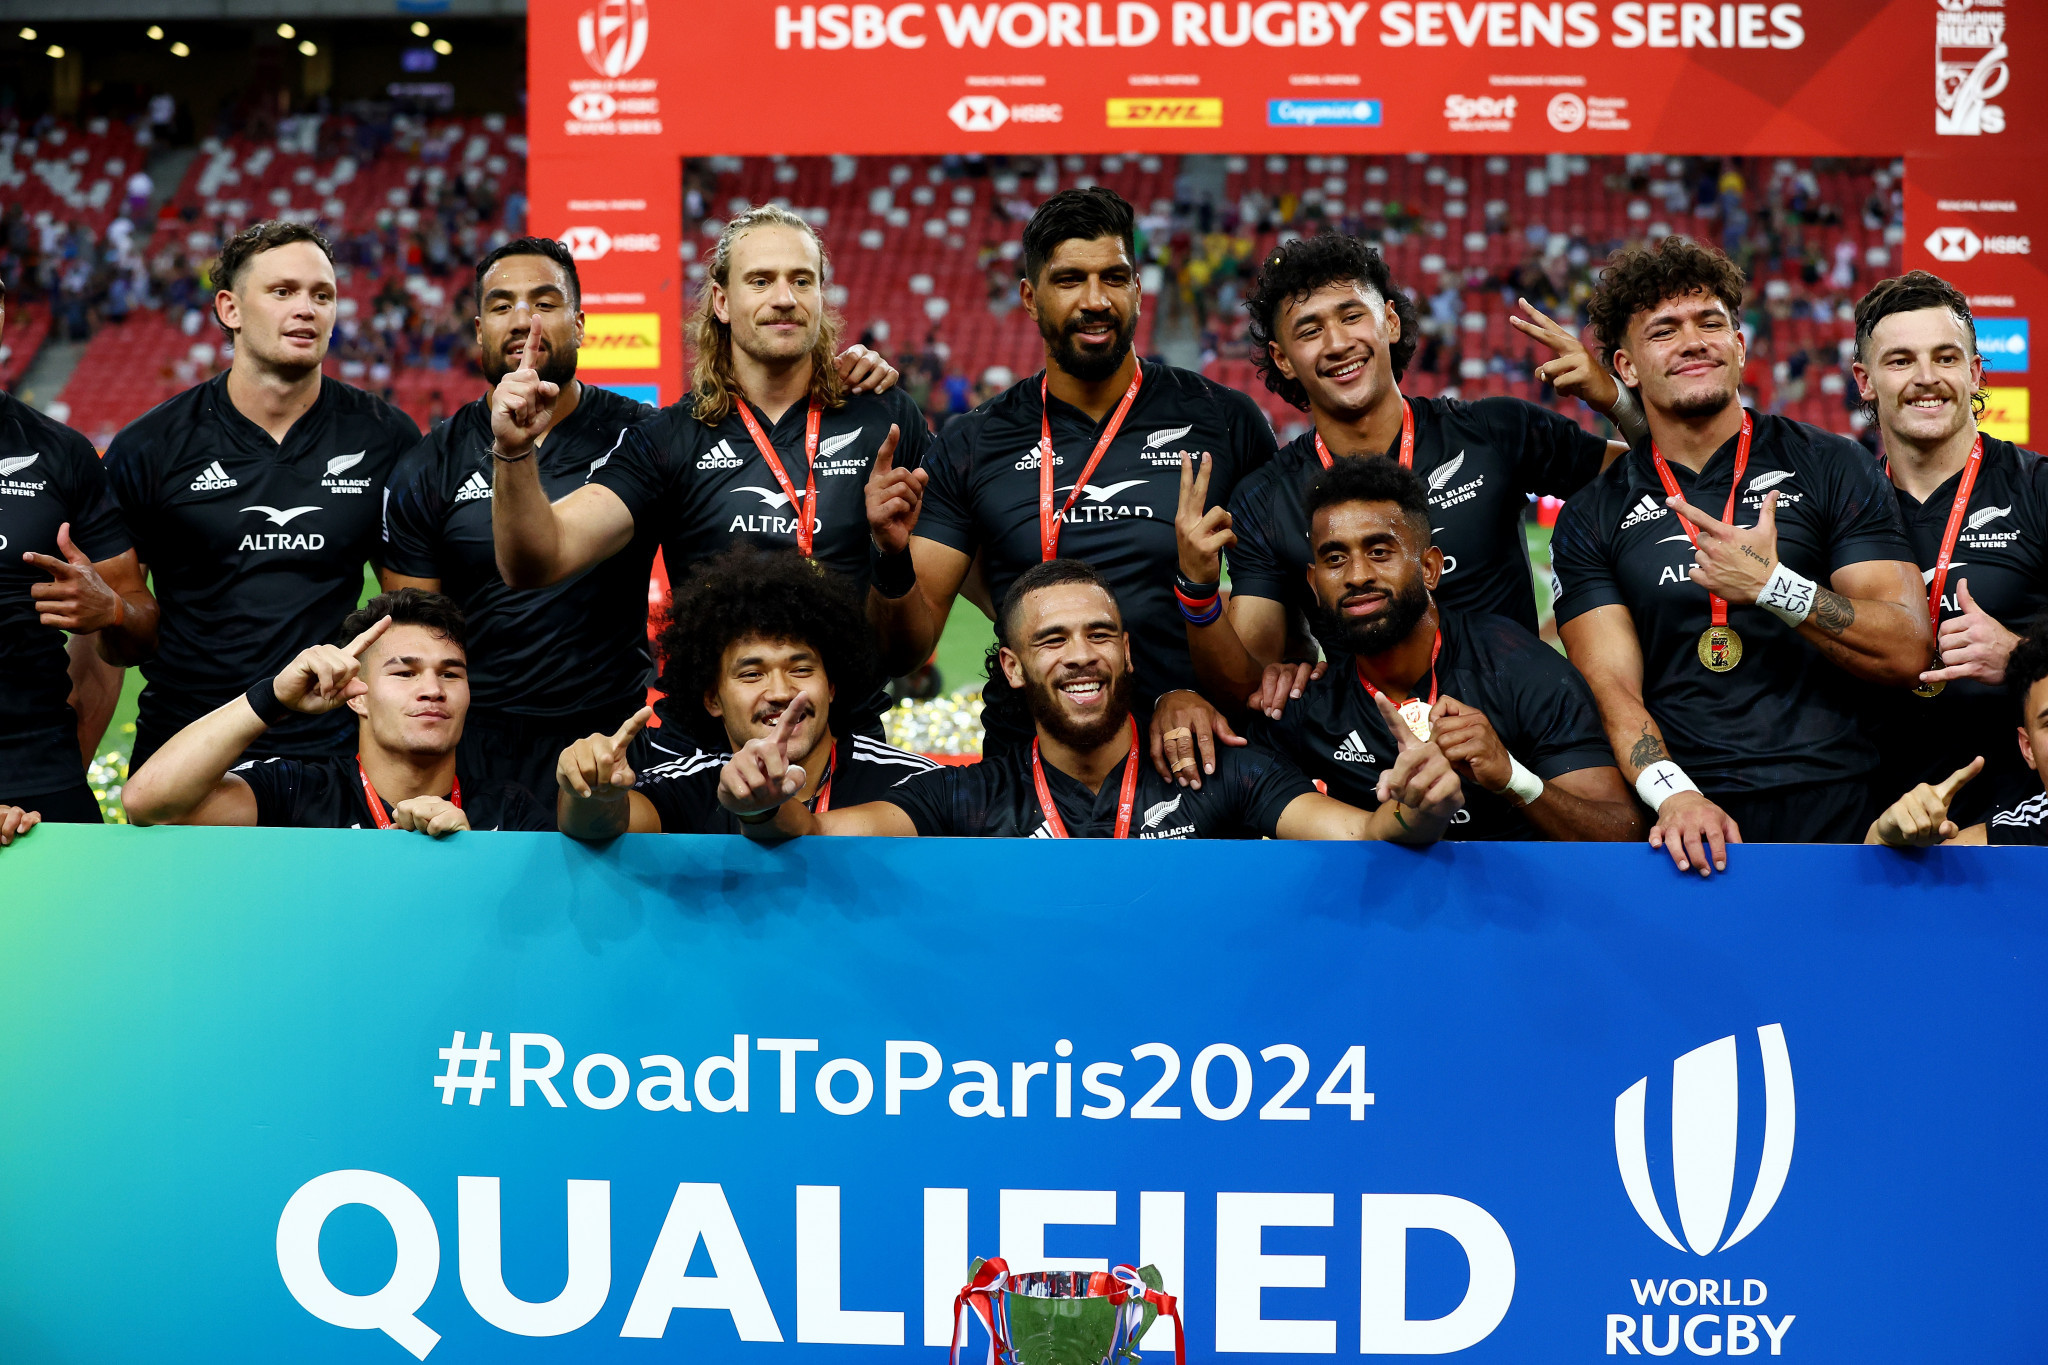 New Zealand celebrate securing their place at the Paris 2024 Olympics with victory at the World Rugby Seven Series event in Singapore ©Getty Images